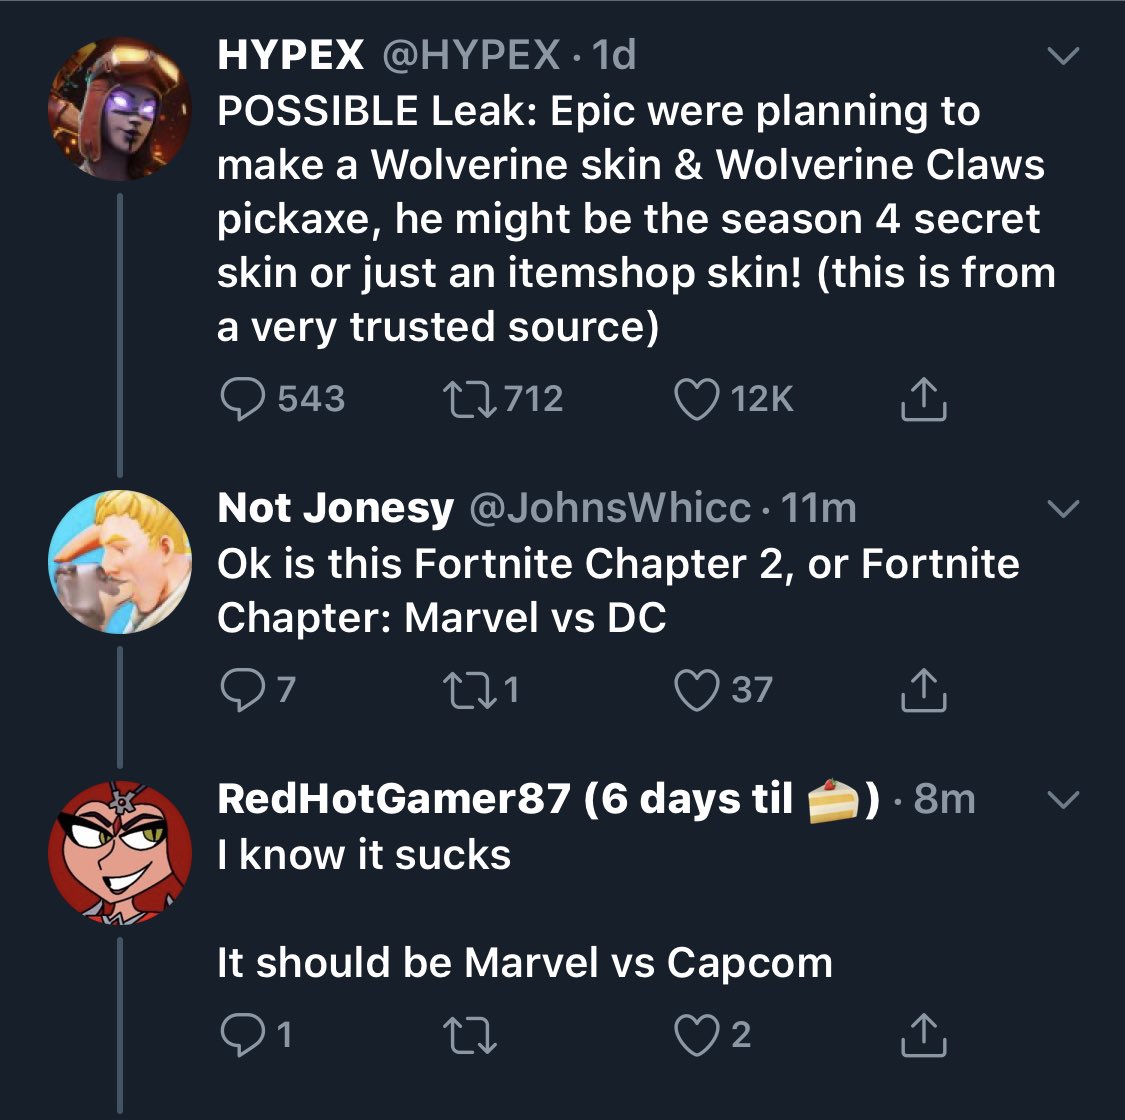 Theory based on NotJonesy’s comment: 

Marvel is symbolic of GHOST and DC is symbolic of Shadow.

Ghost were the Head Honchos for a majority of the season, and so Deadpool was the representative, along with the X-Force

Now, Shadow reigns supreme and is evident through (1/2)